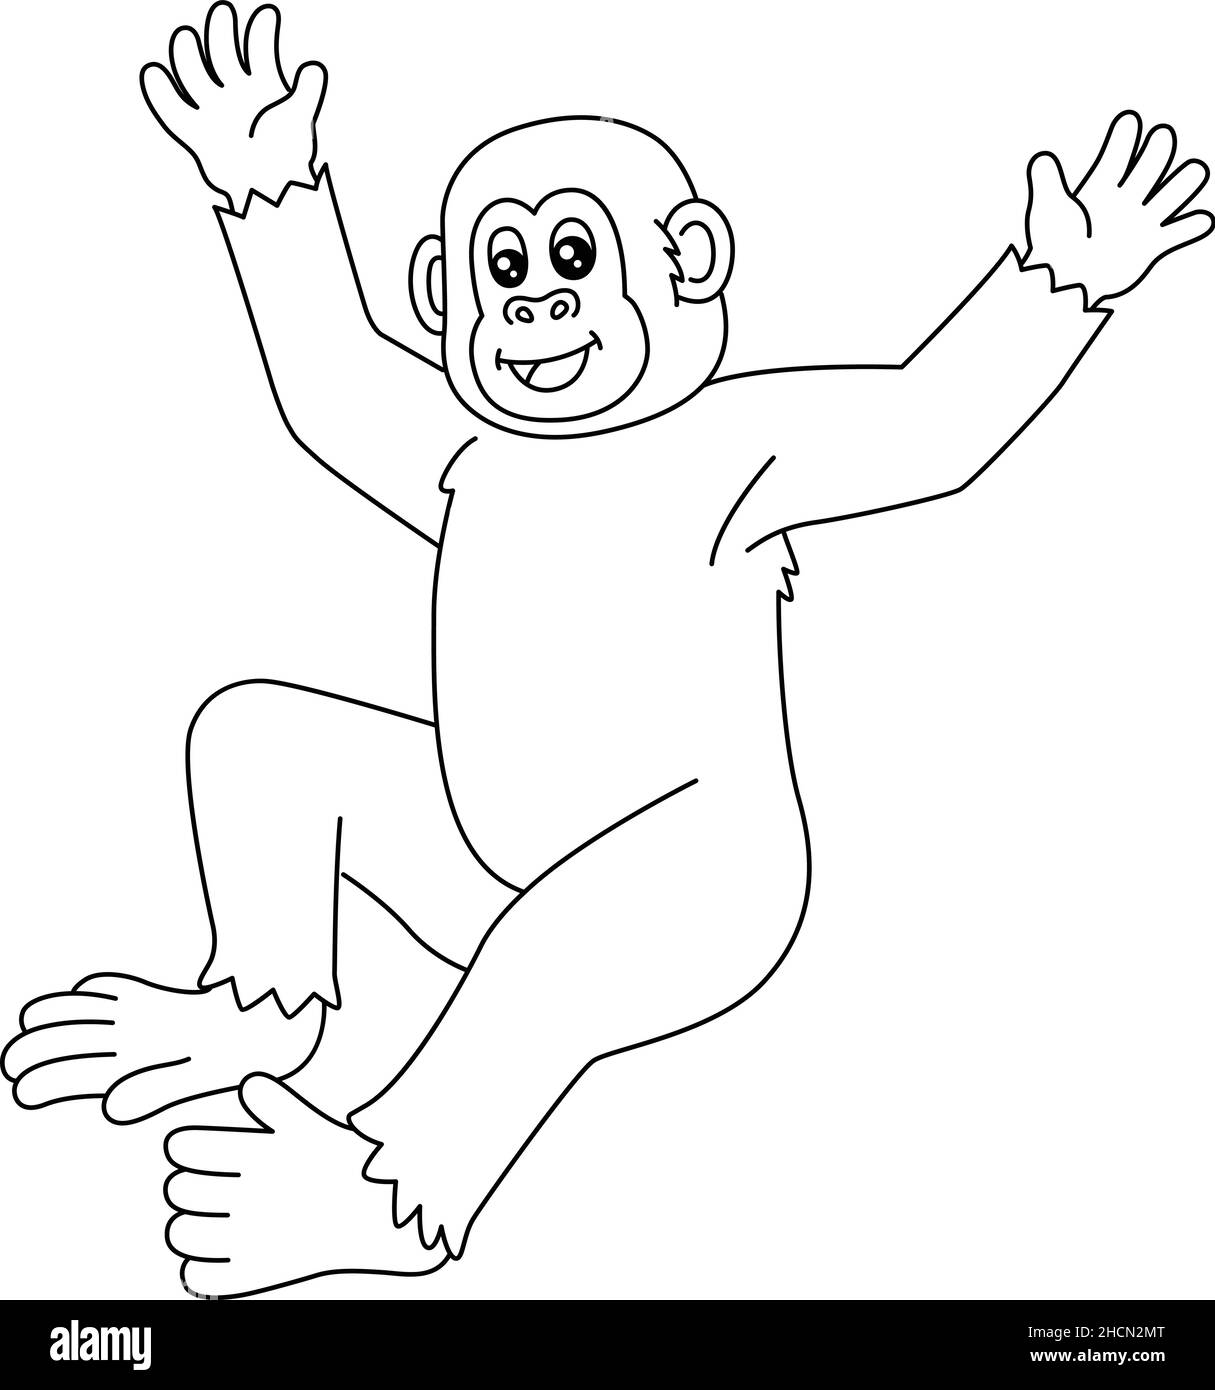 Chimpanzee Coloring Page Isolated for Kids Stock Vector